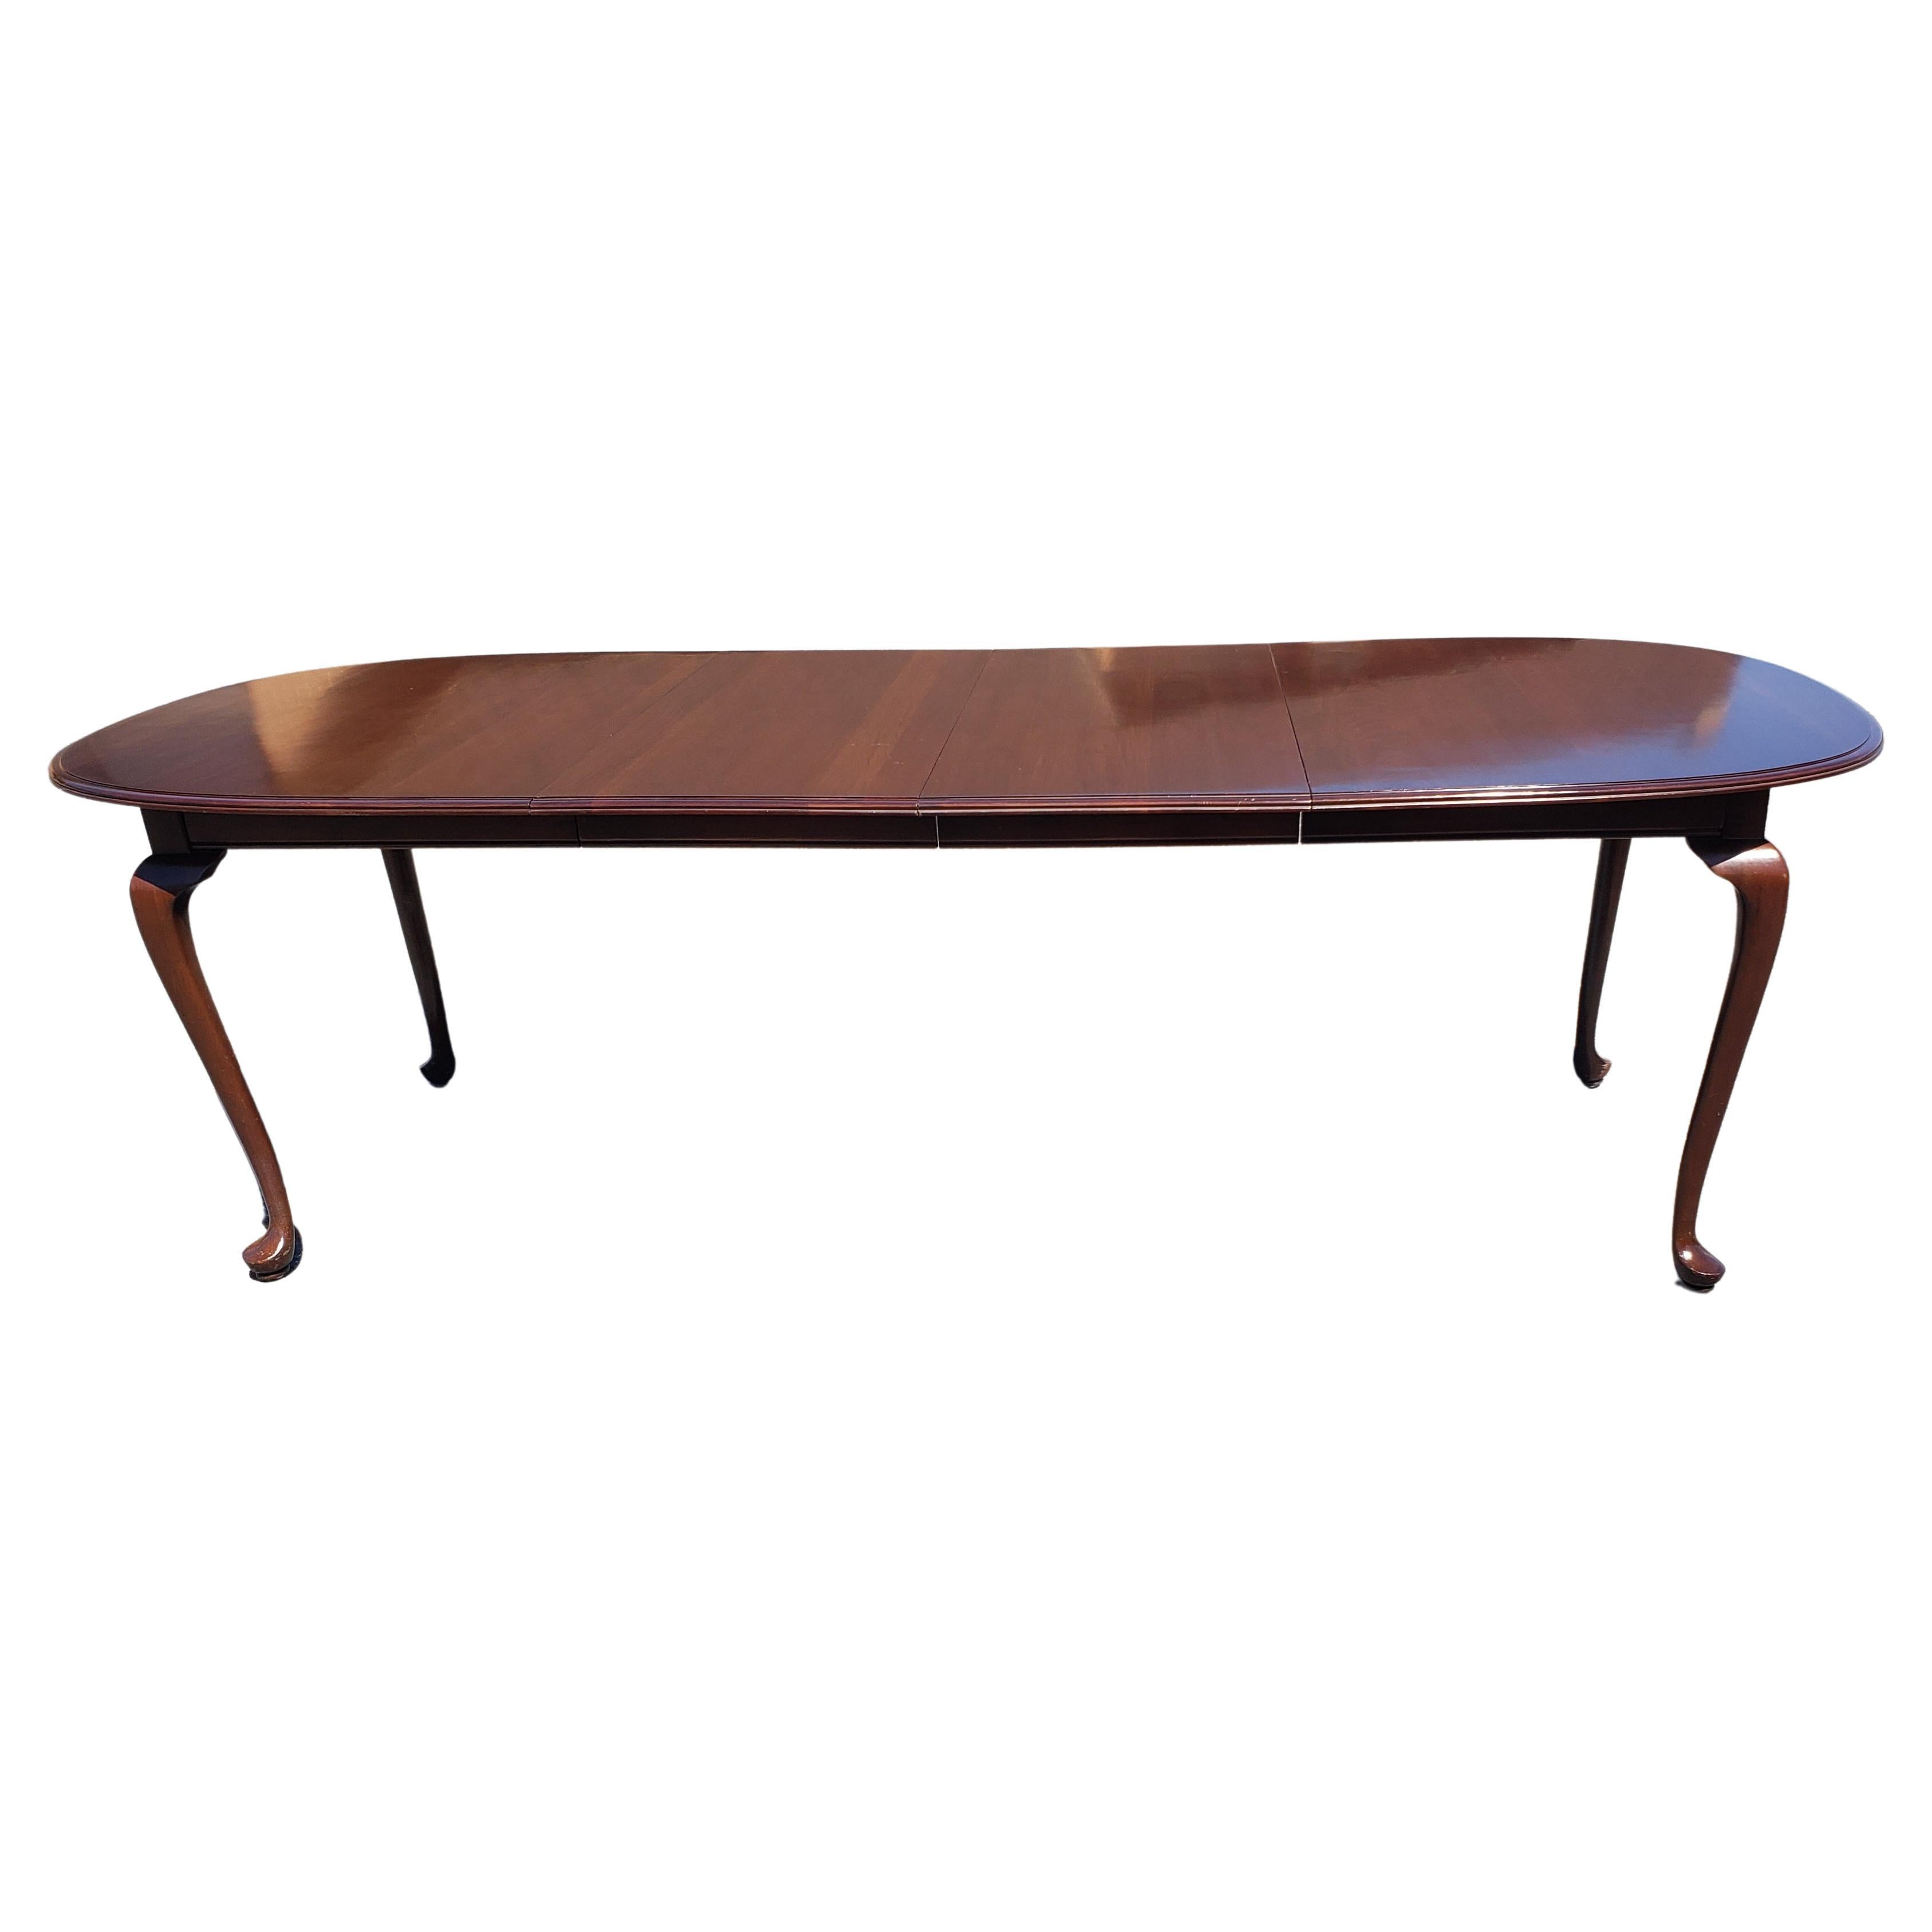 Stained Ethan Allen Solid Cherry Extension Dining Room Table